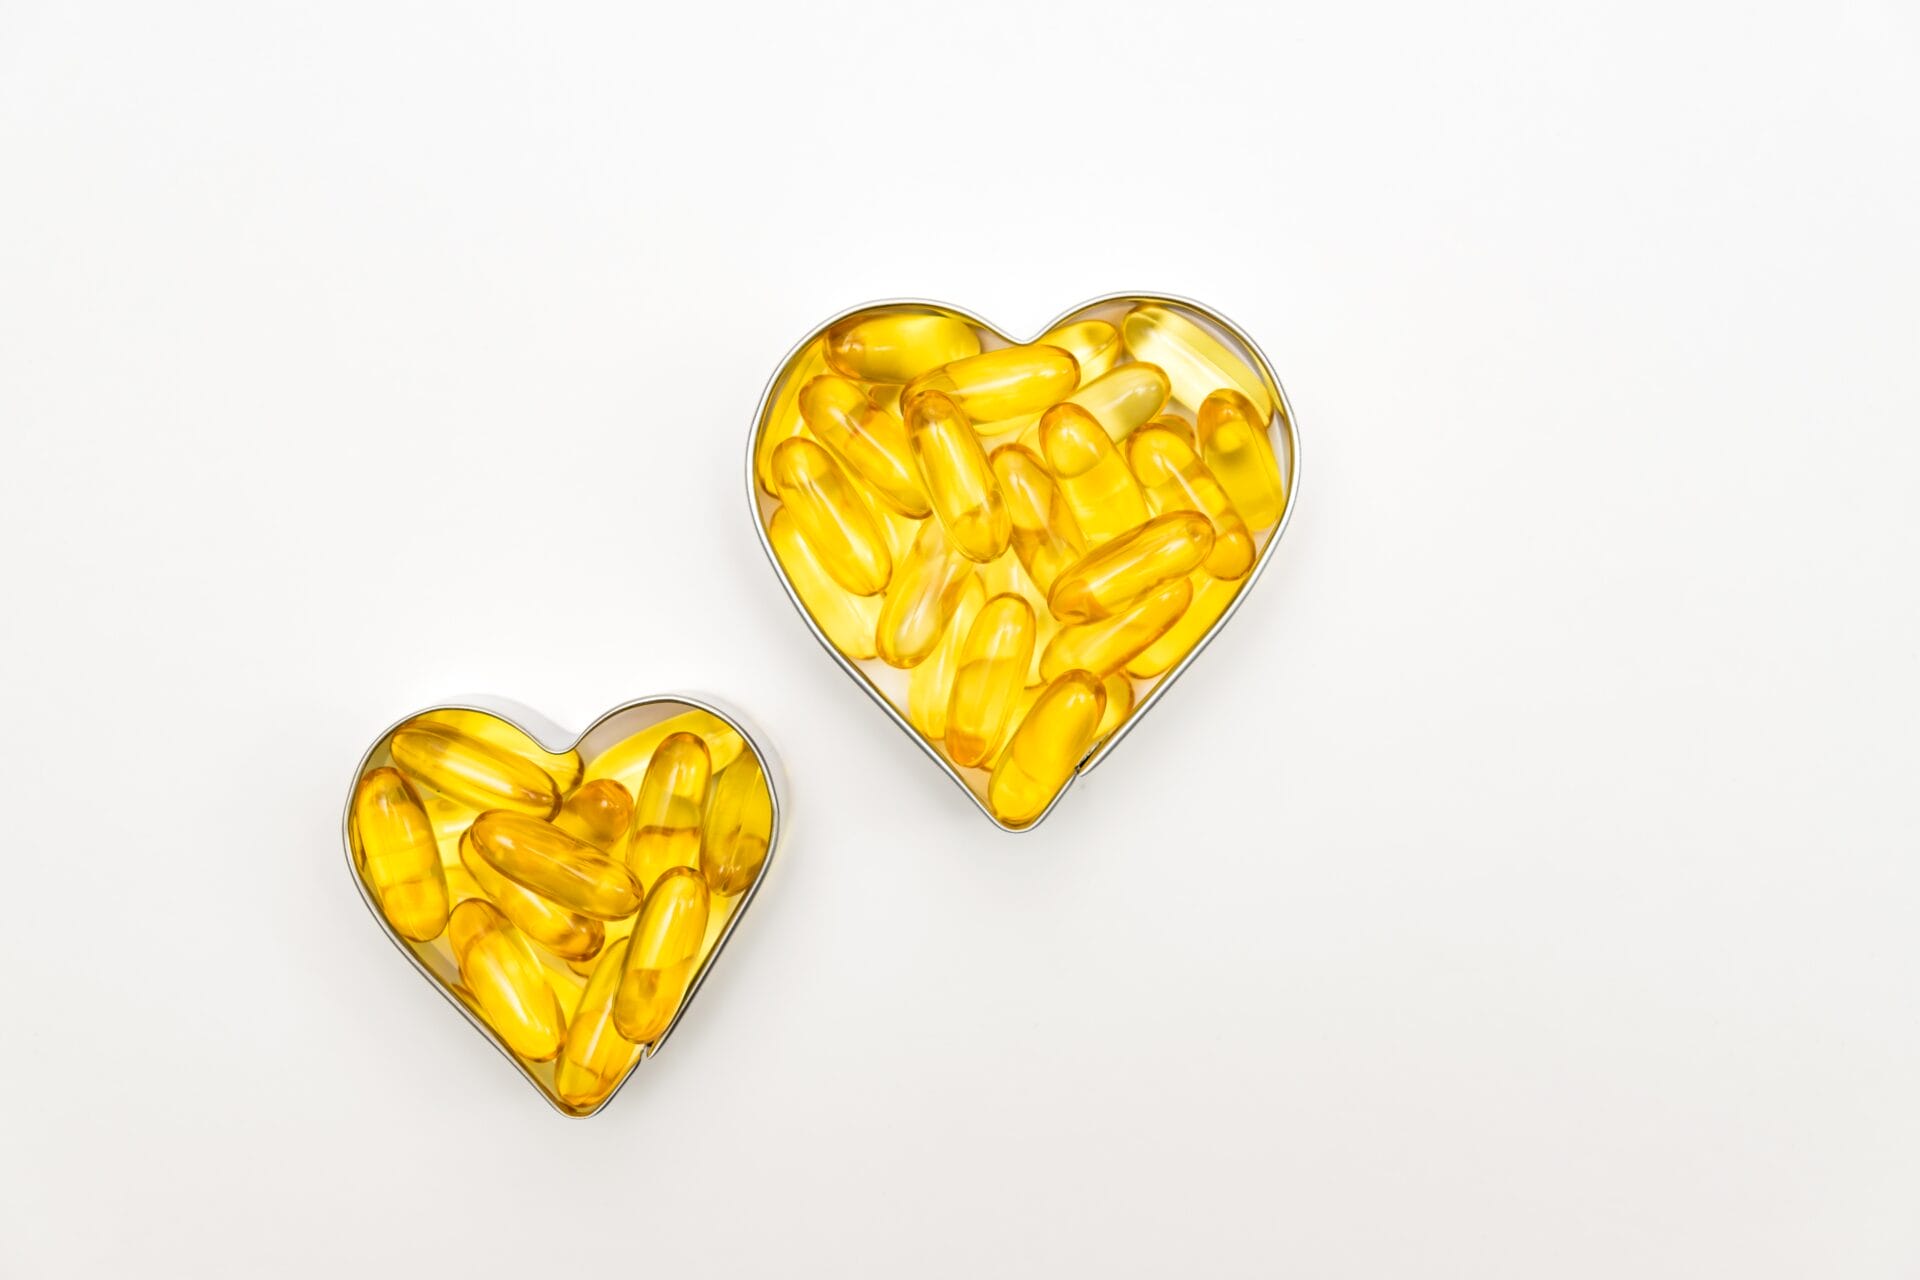 Top 5 supplements for optimal health